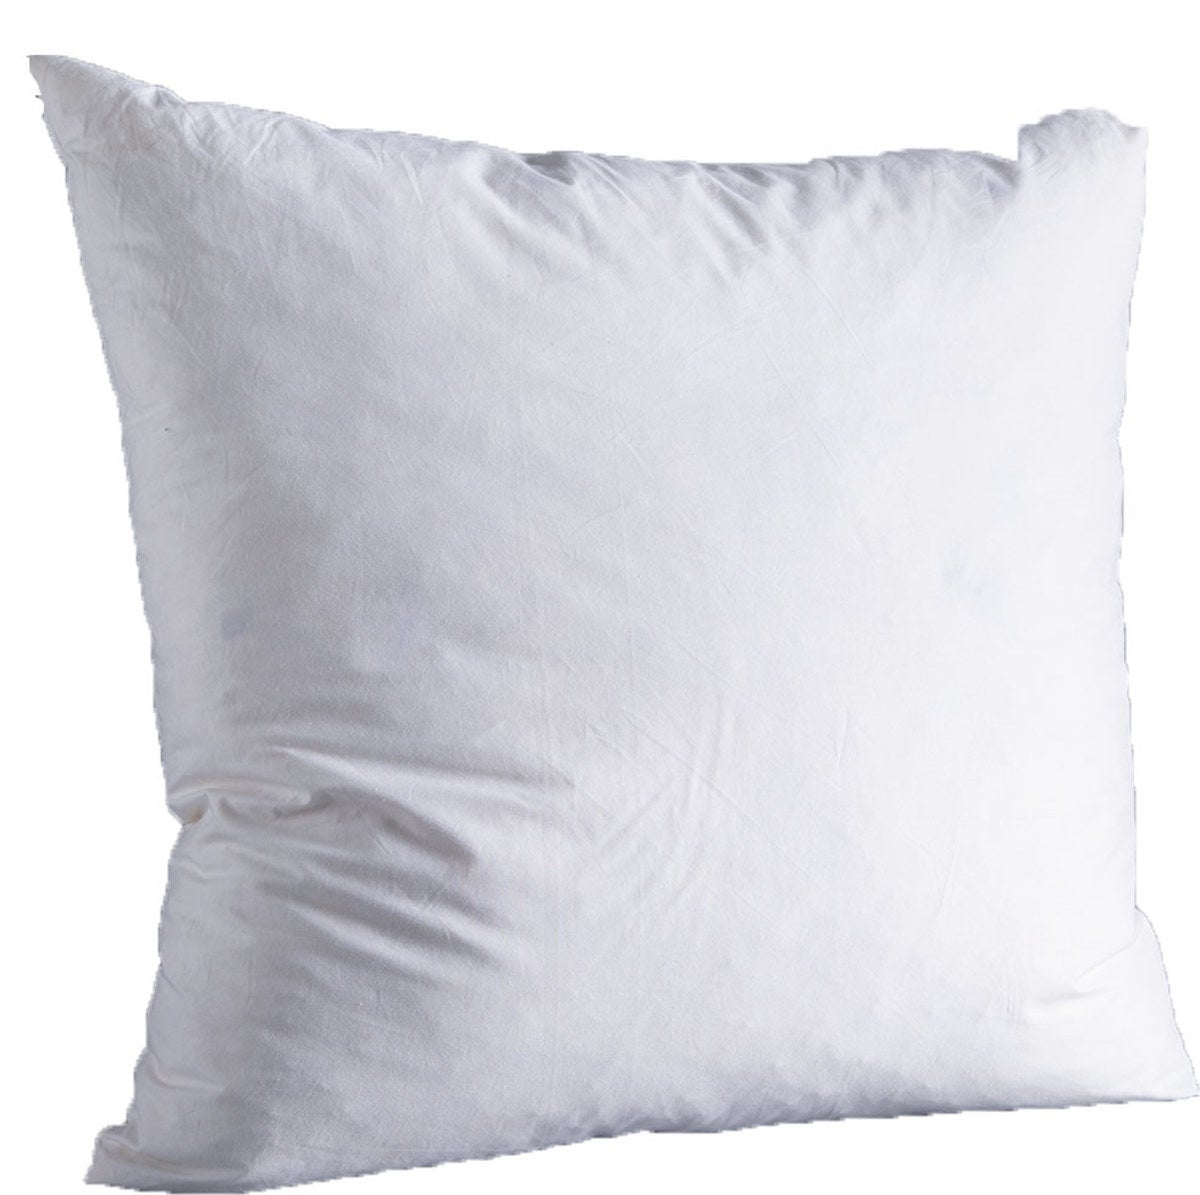 Natural Down-Filled 24"SQ. Decorative Pillow Insert